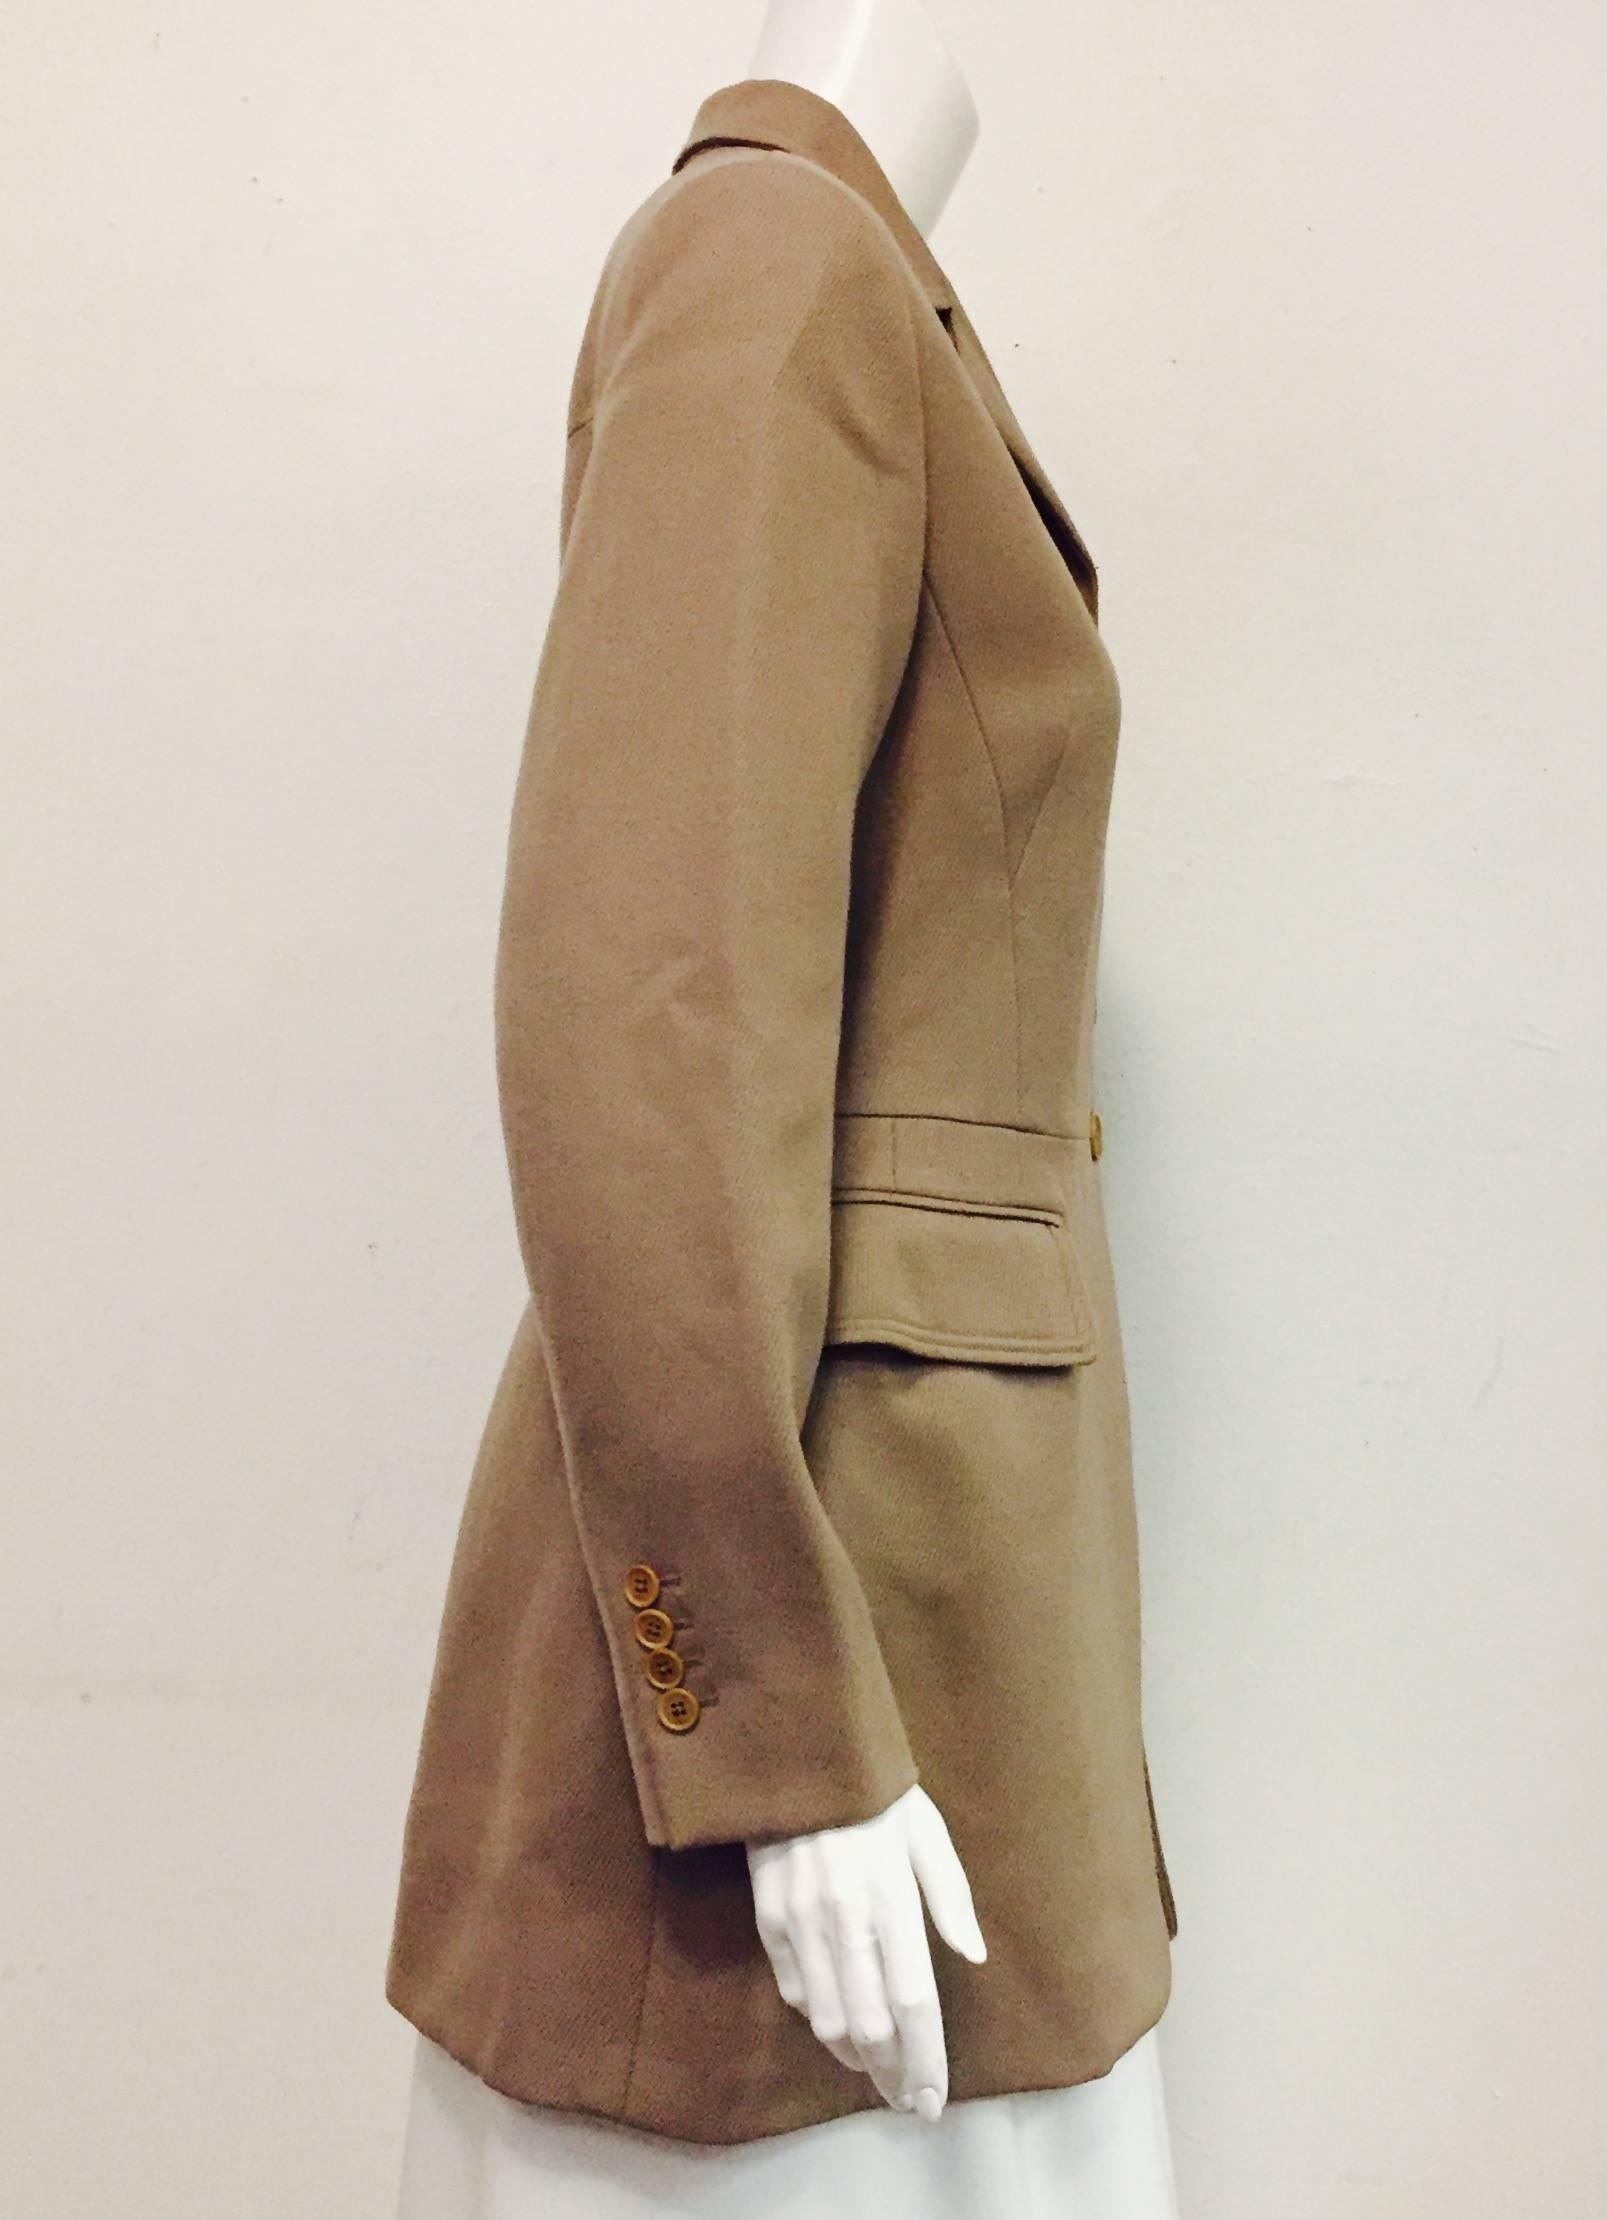 Hermes' elegantly shaped taupe woman's riding jacket features exquisite details allover, including 4 button single breast  construction,  notch collar and 2 flap pockets at hip.  Chest has single slit pocket.  Jacket length extends to mid thigh and